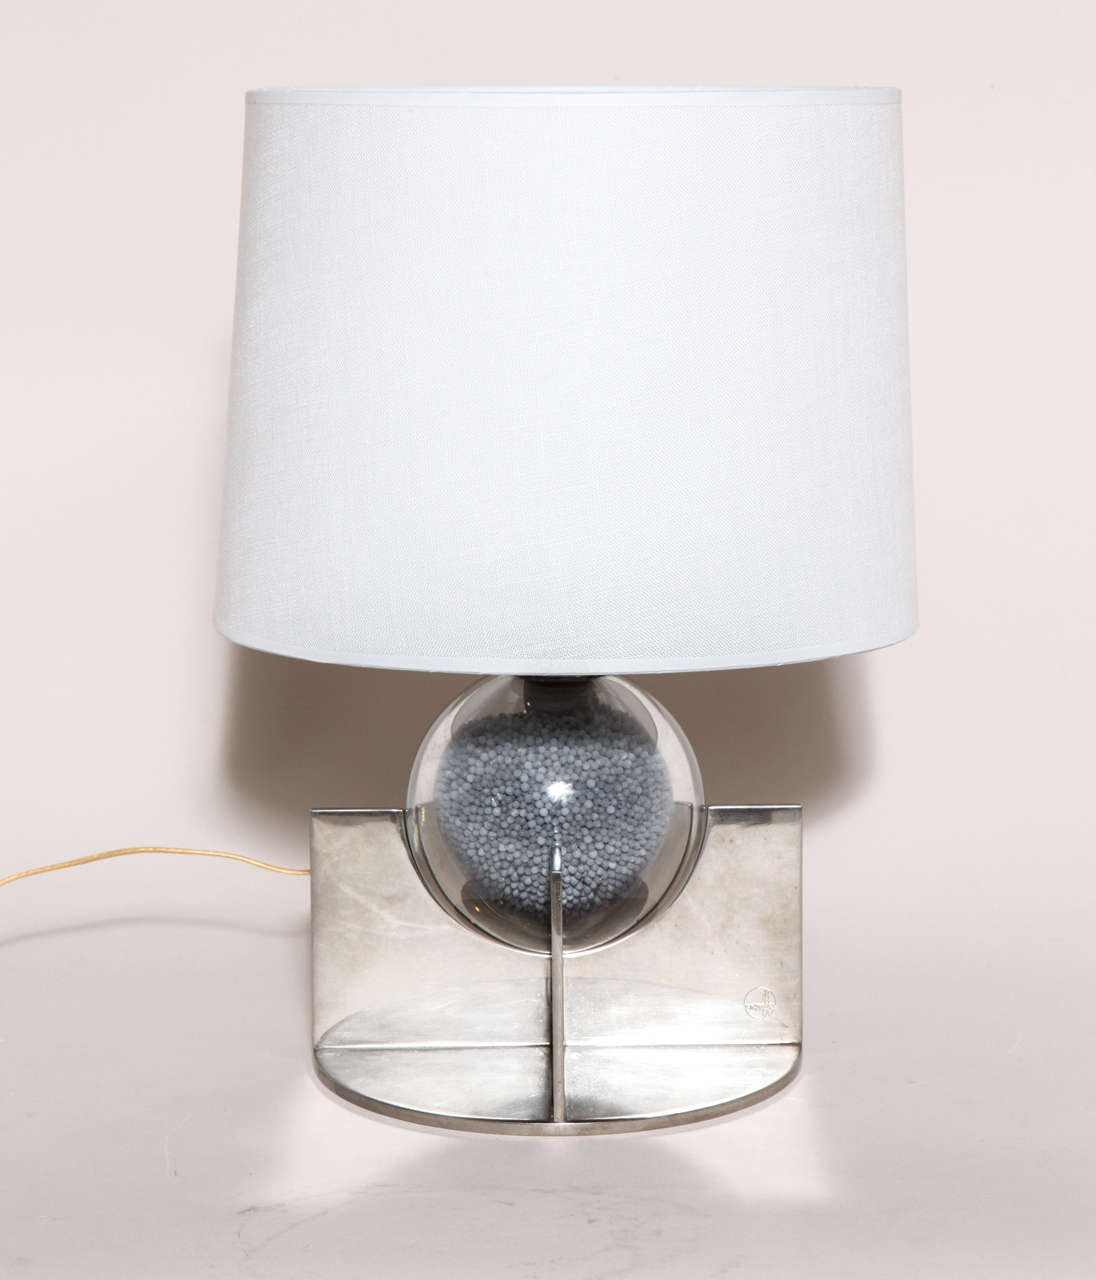 A table lamp with a clear glass sphere filled with small lead pellets on a nickelled brass cruciform base with a silk shade.
With original French electrical components, but newly rewired to American standard and with a dimmer switch.
Good working